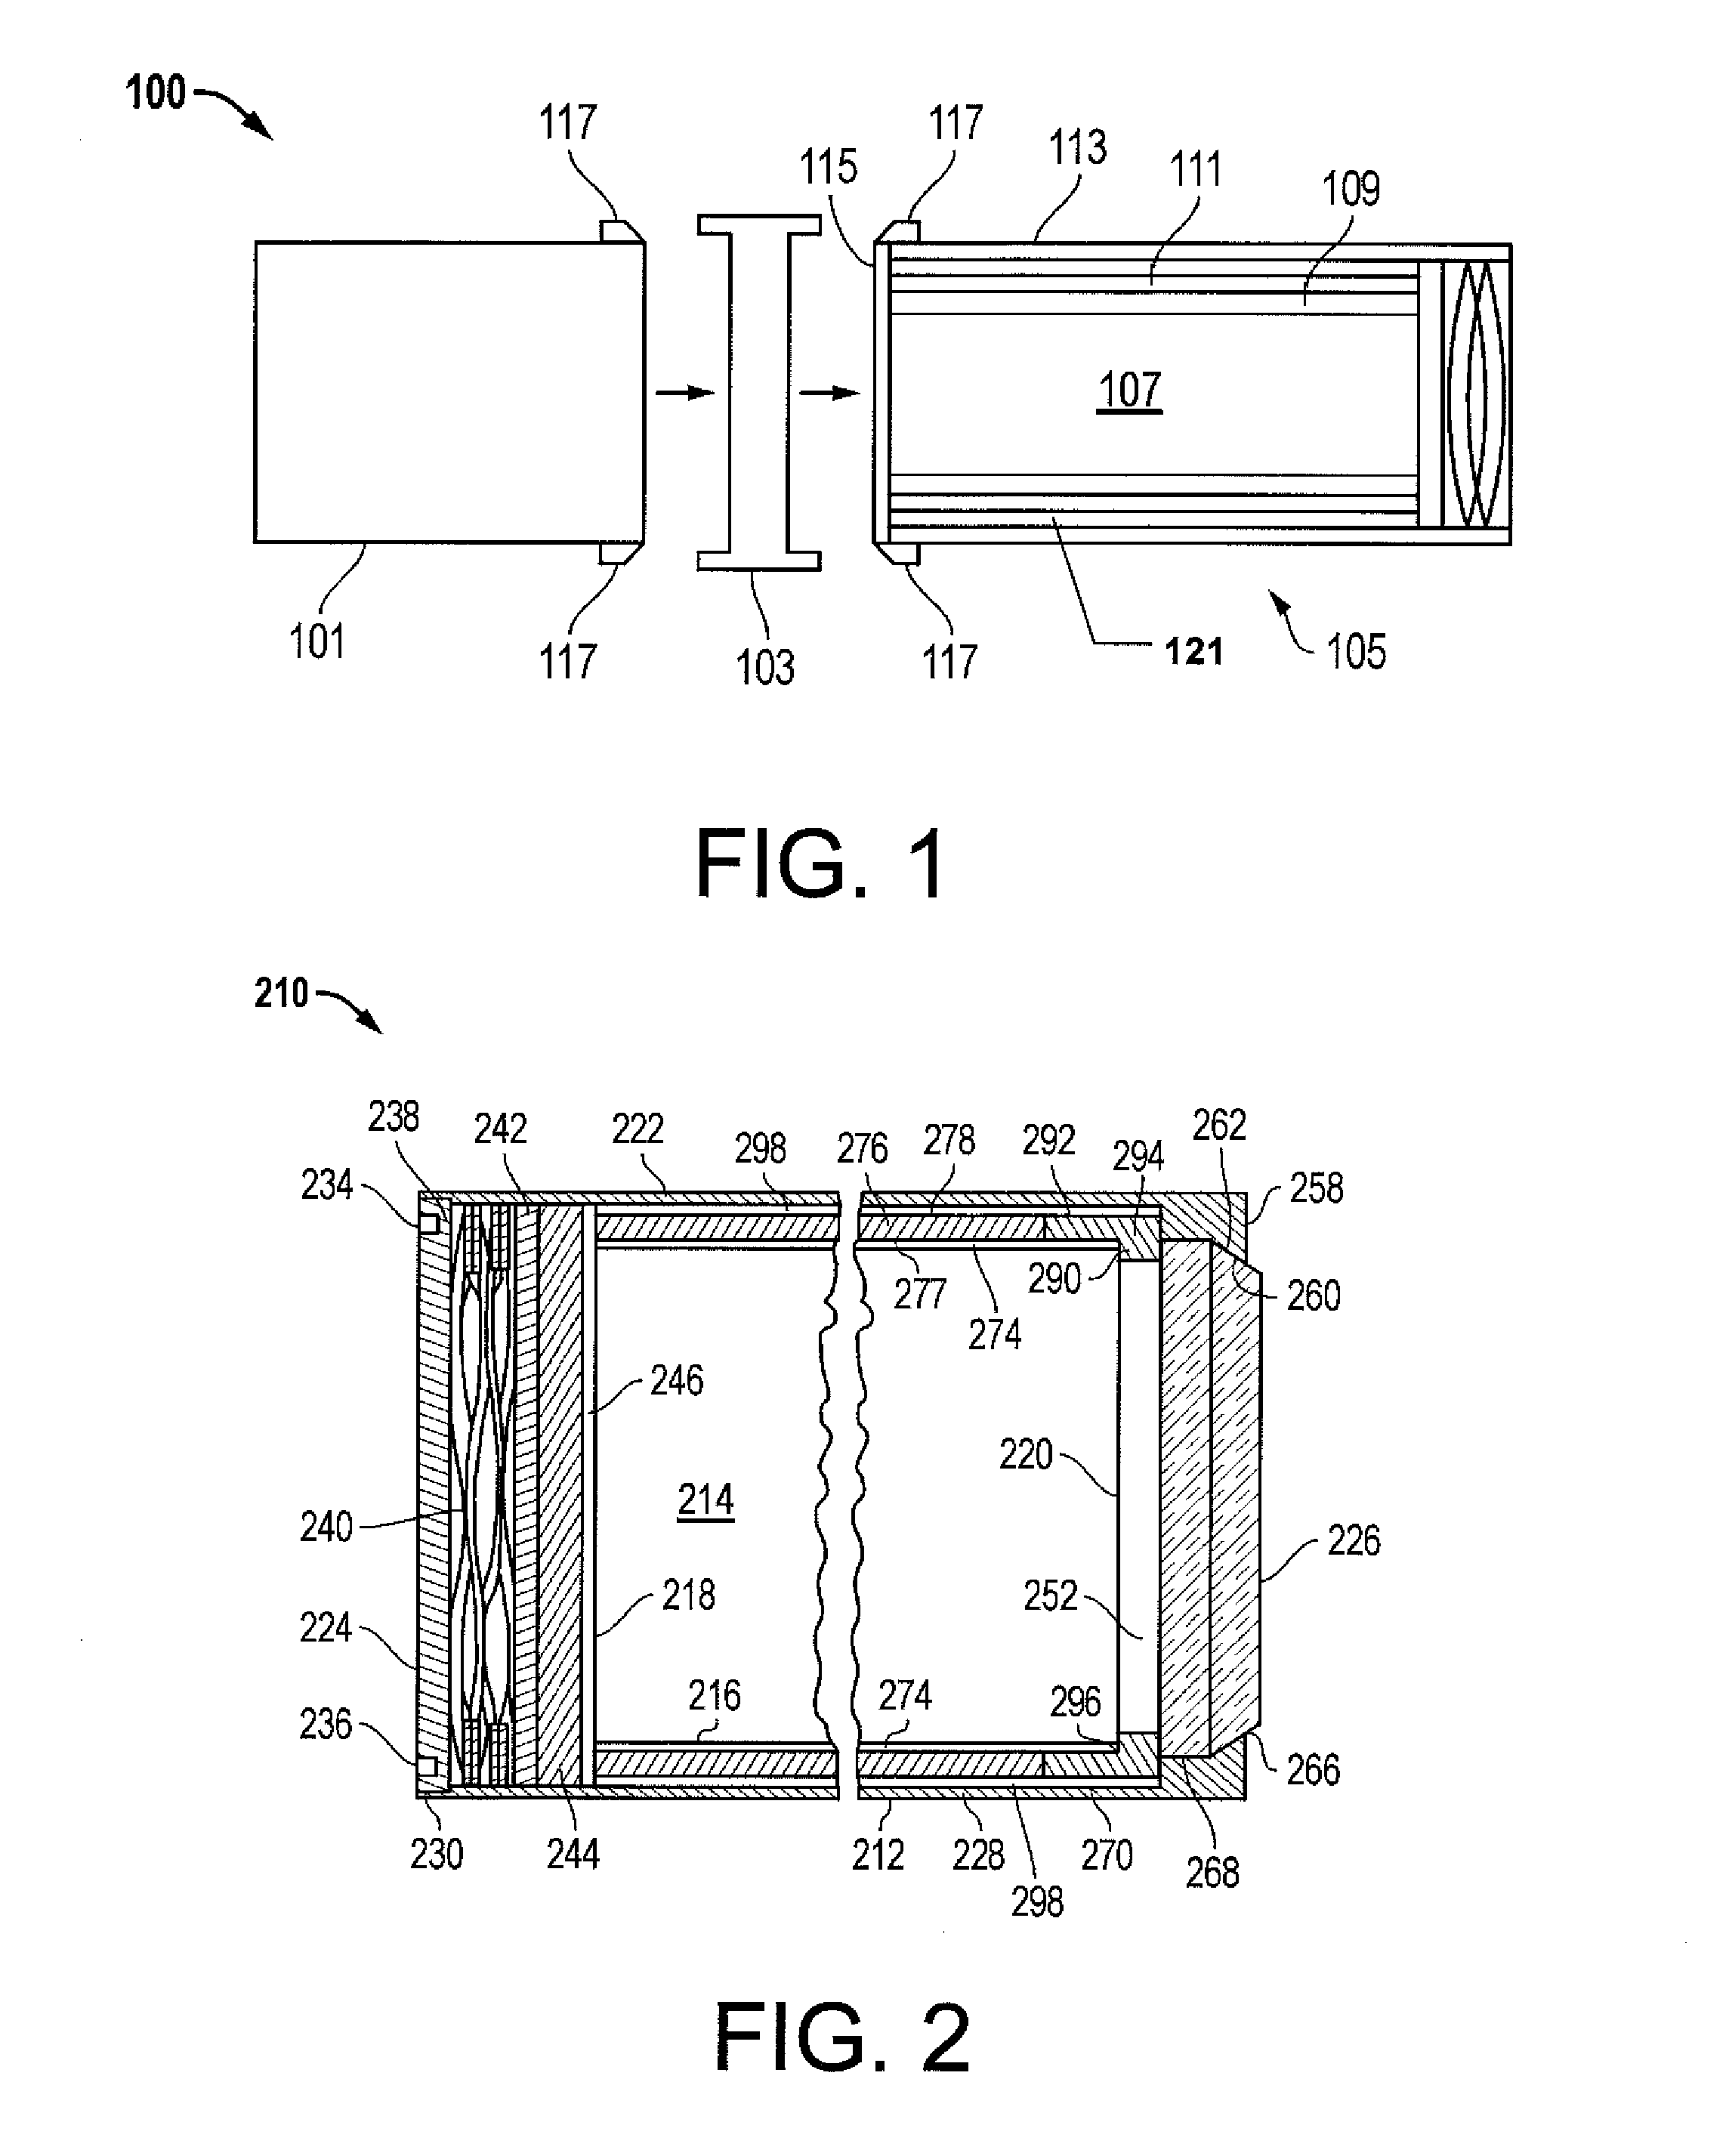 Rare-earth materials, scintillator crystals, and ruggedized scintillator devices incorporating such crystals